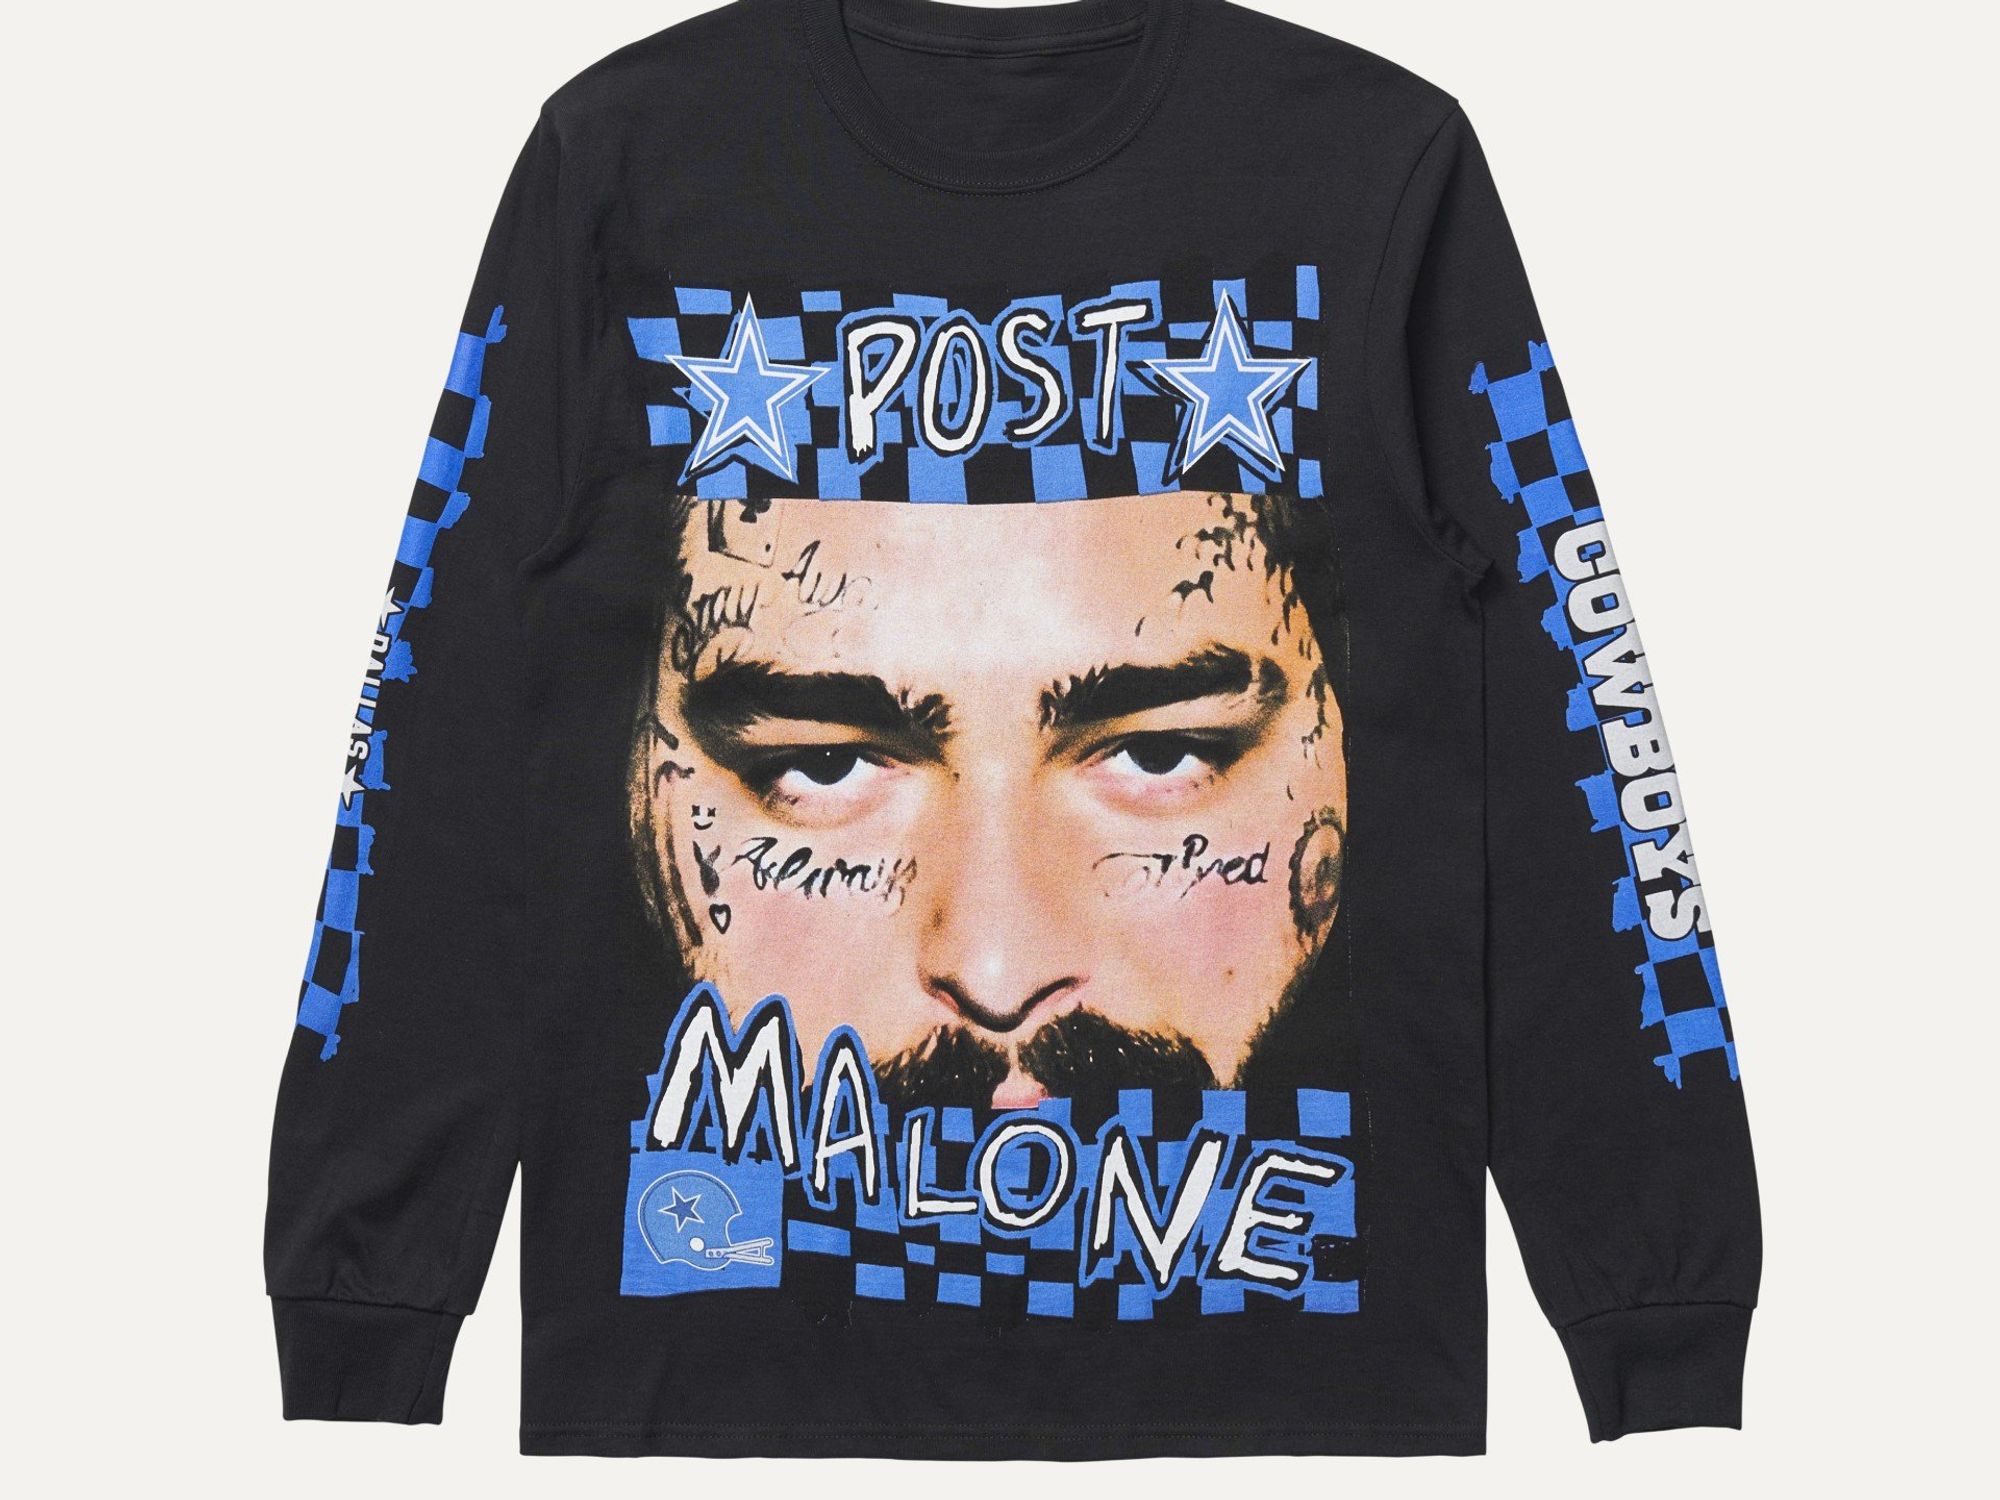 Post Malone collaborates on new line of Dallas Cowboys hoodies and